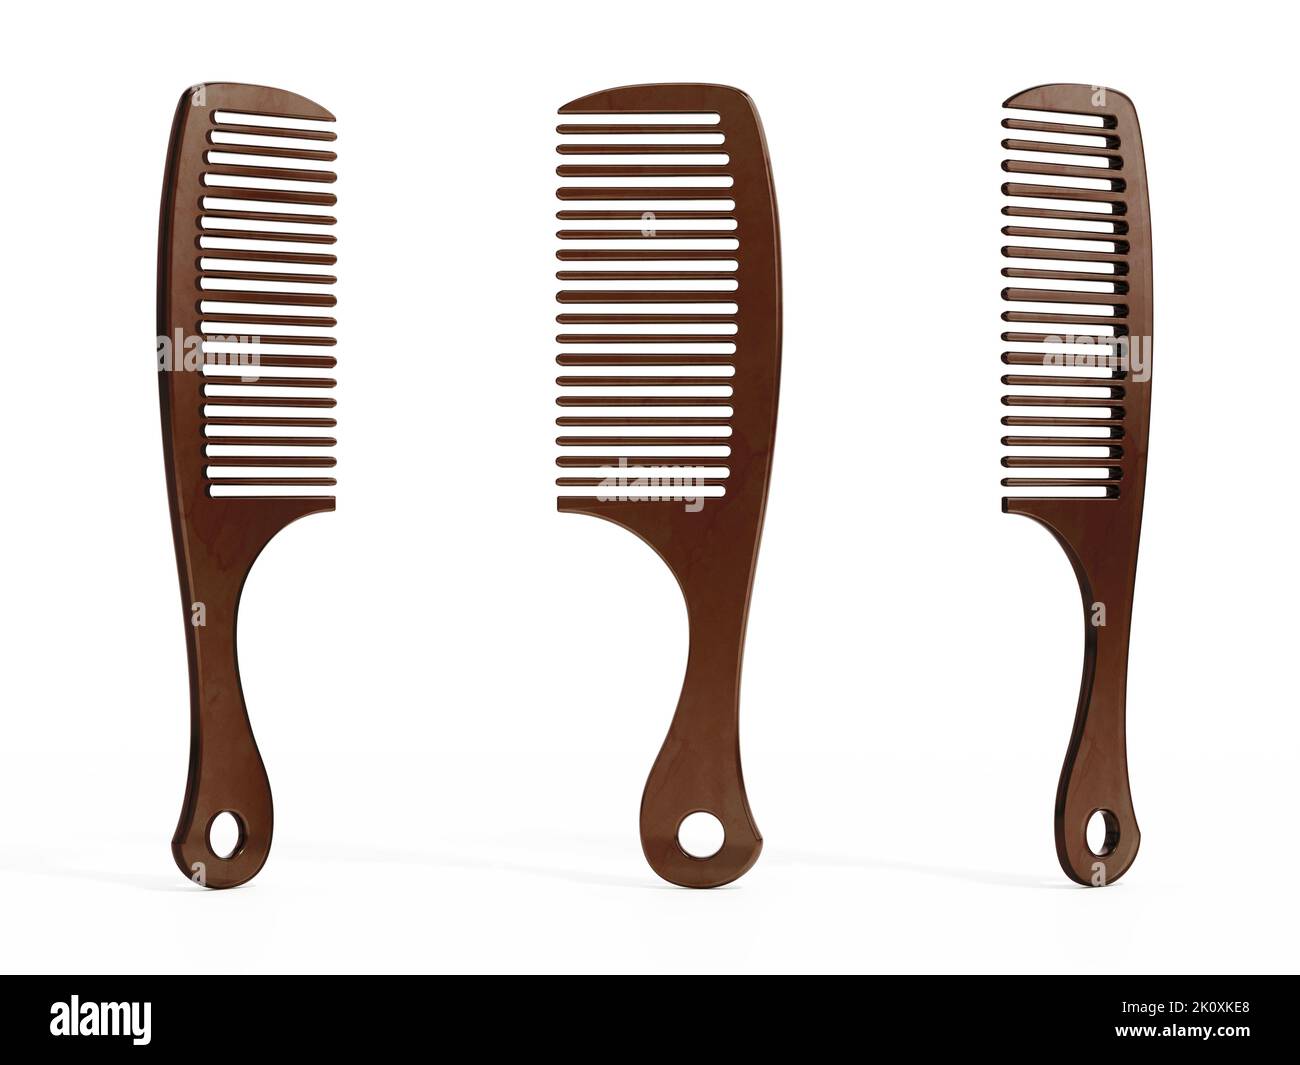 Women's combs isolated on white background. 3D illustration. Stock Photo